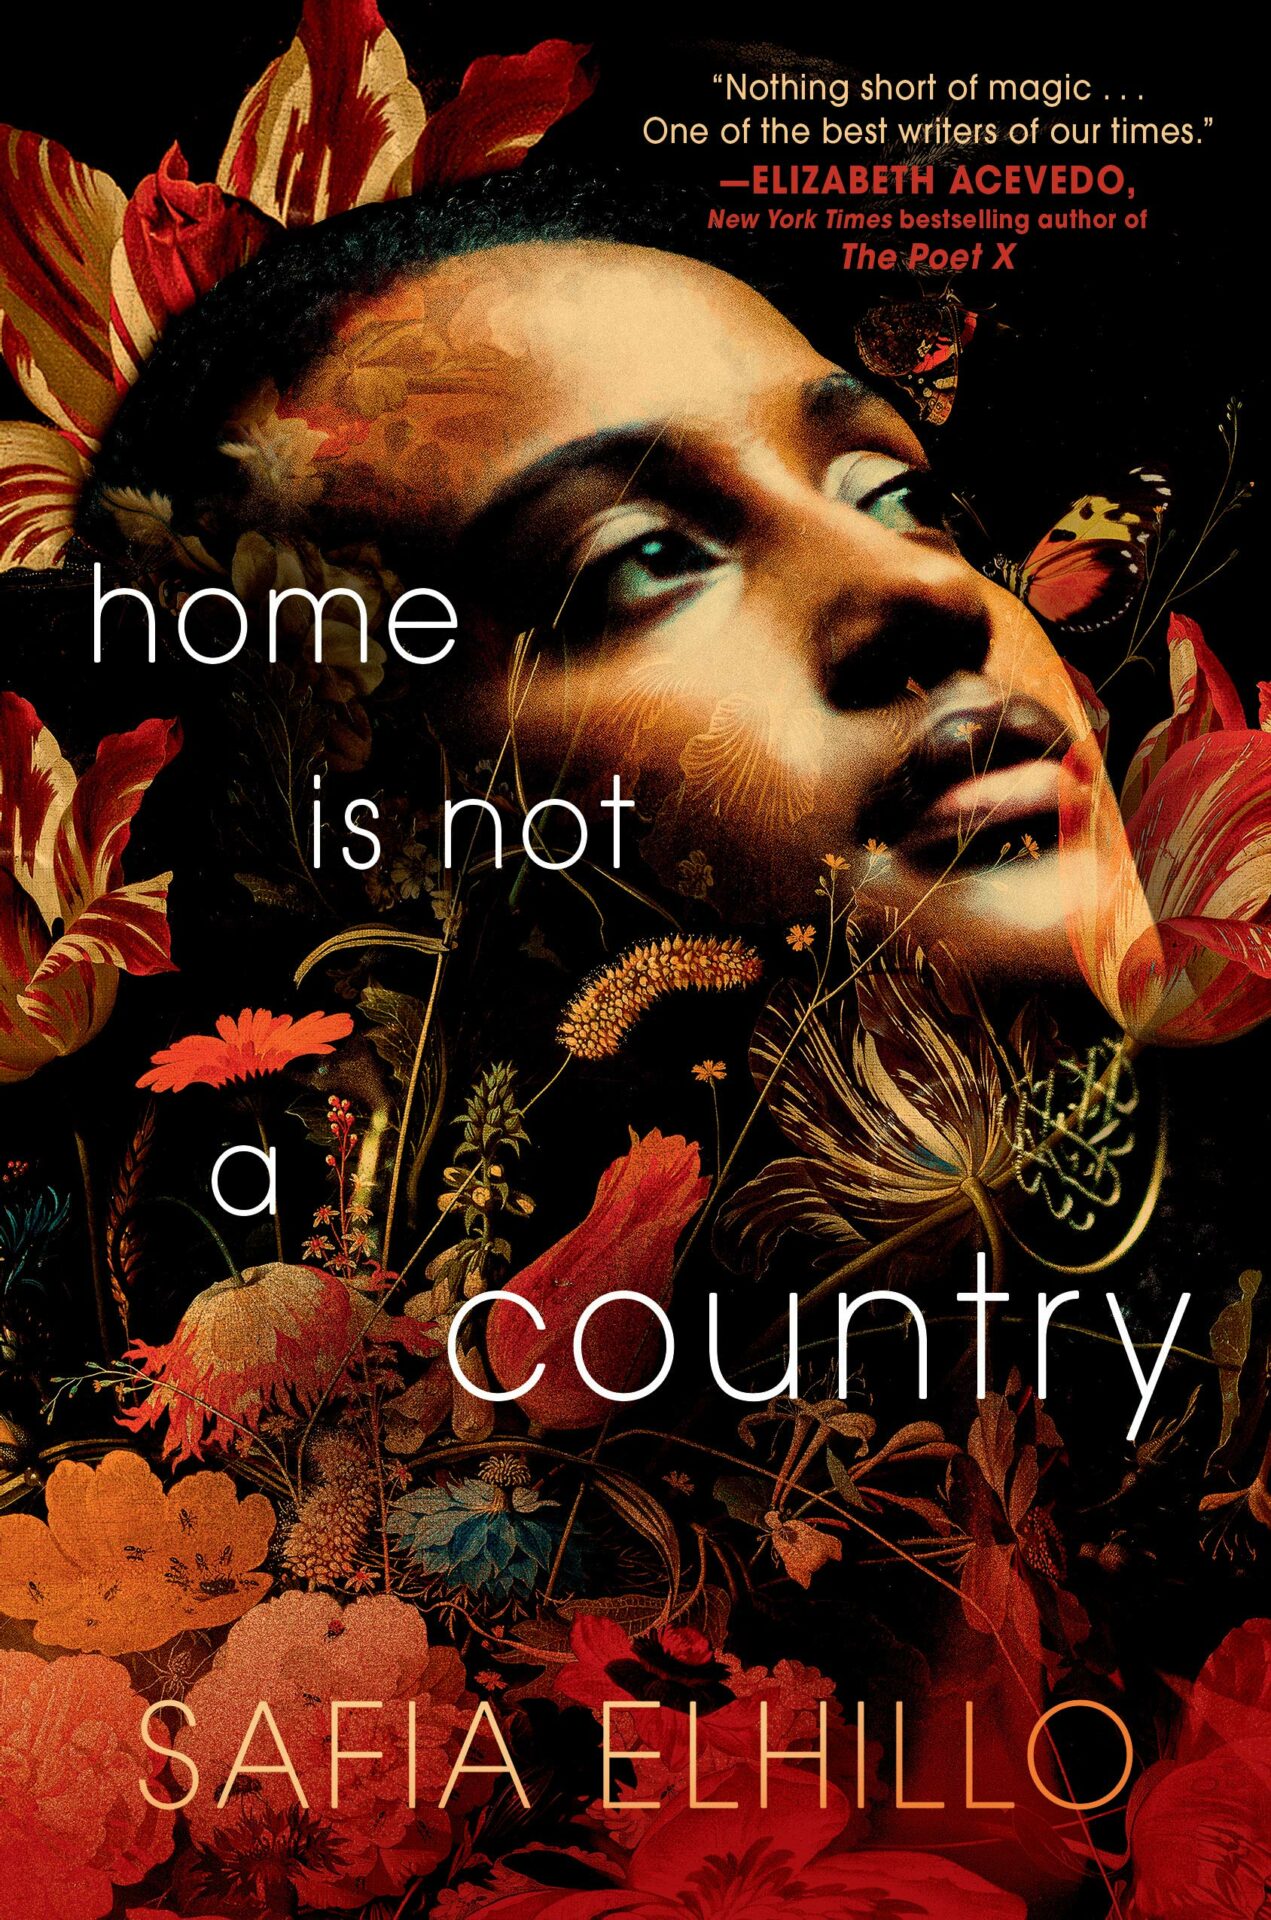 Home Is Not A Country” by Safia Elhillo